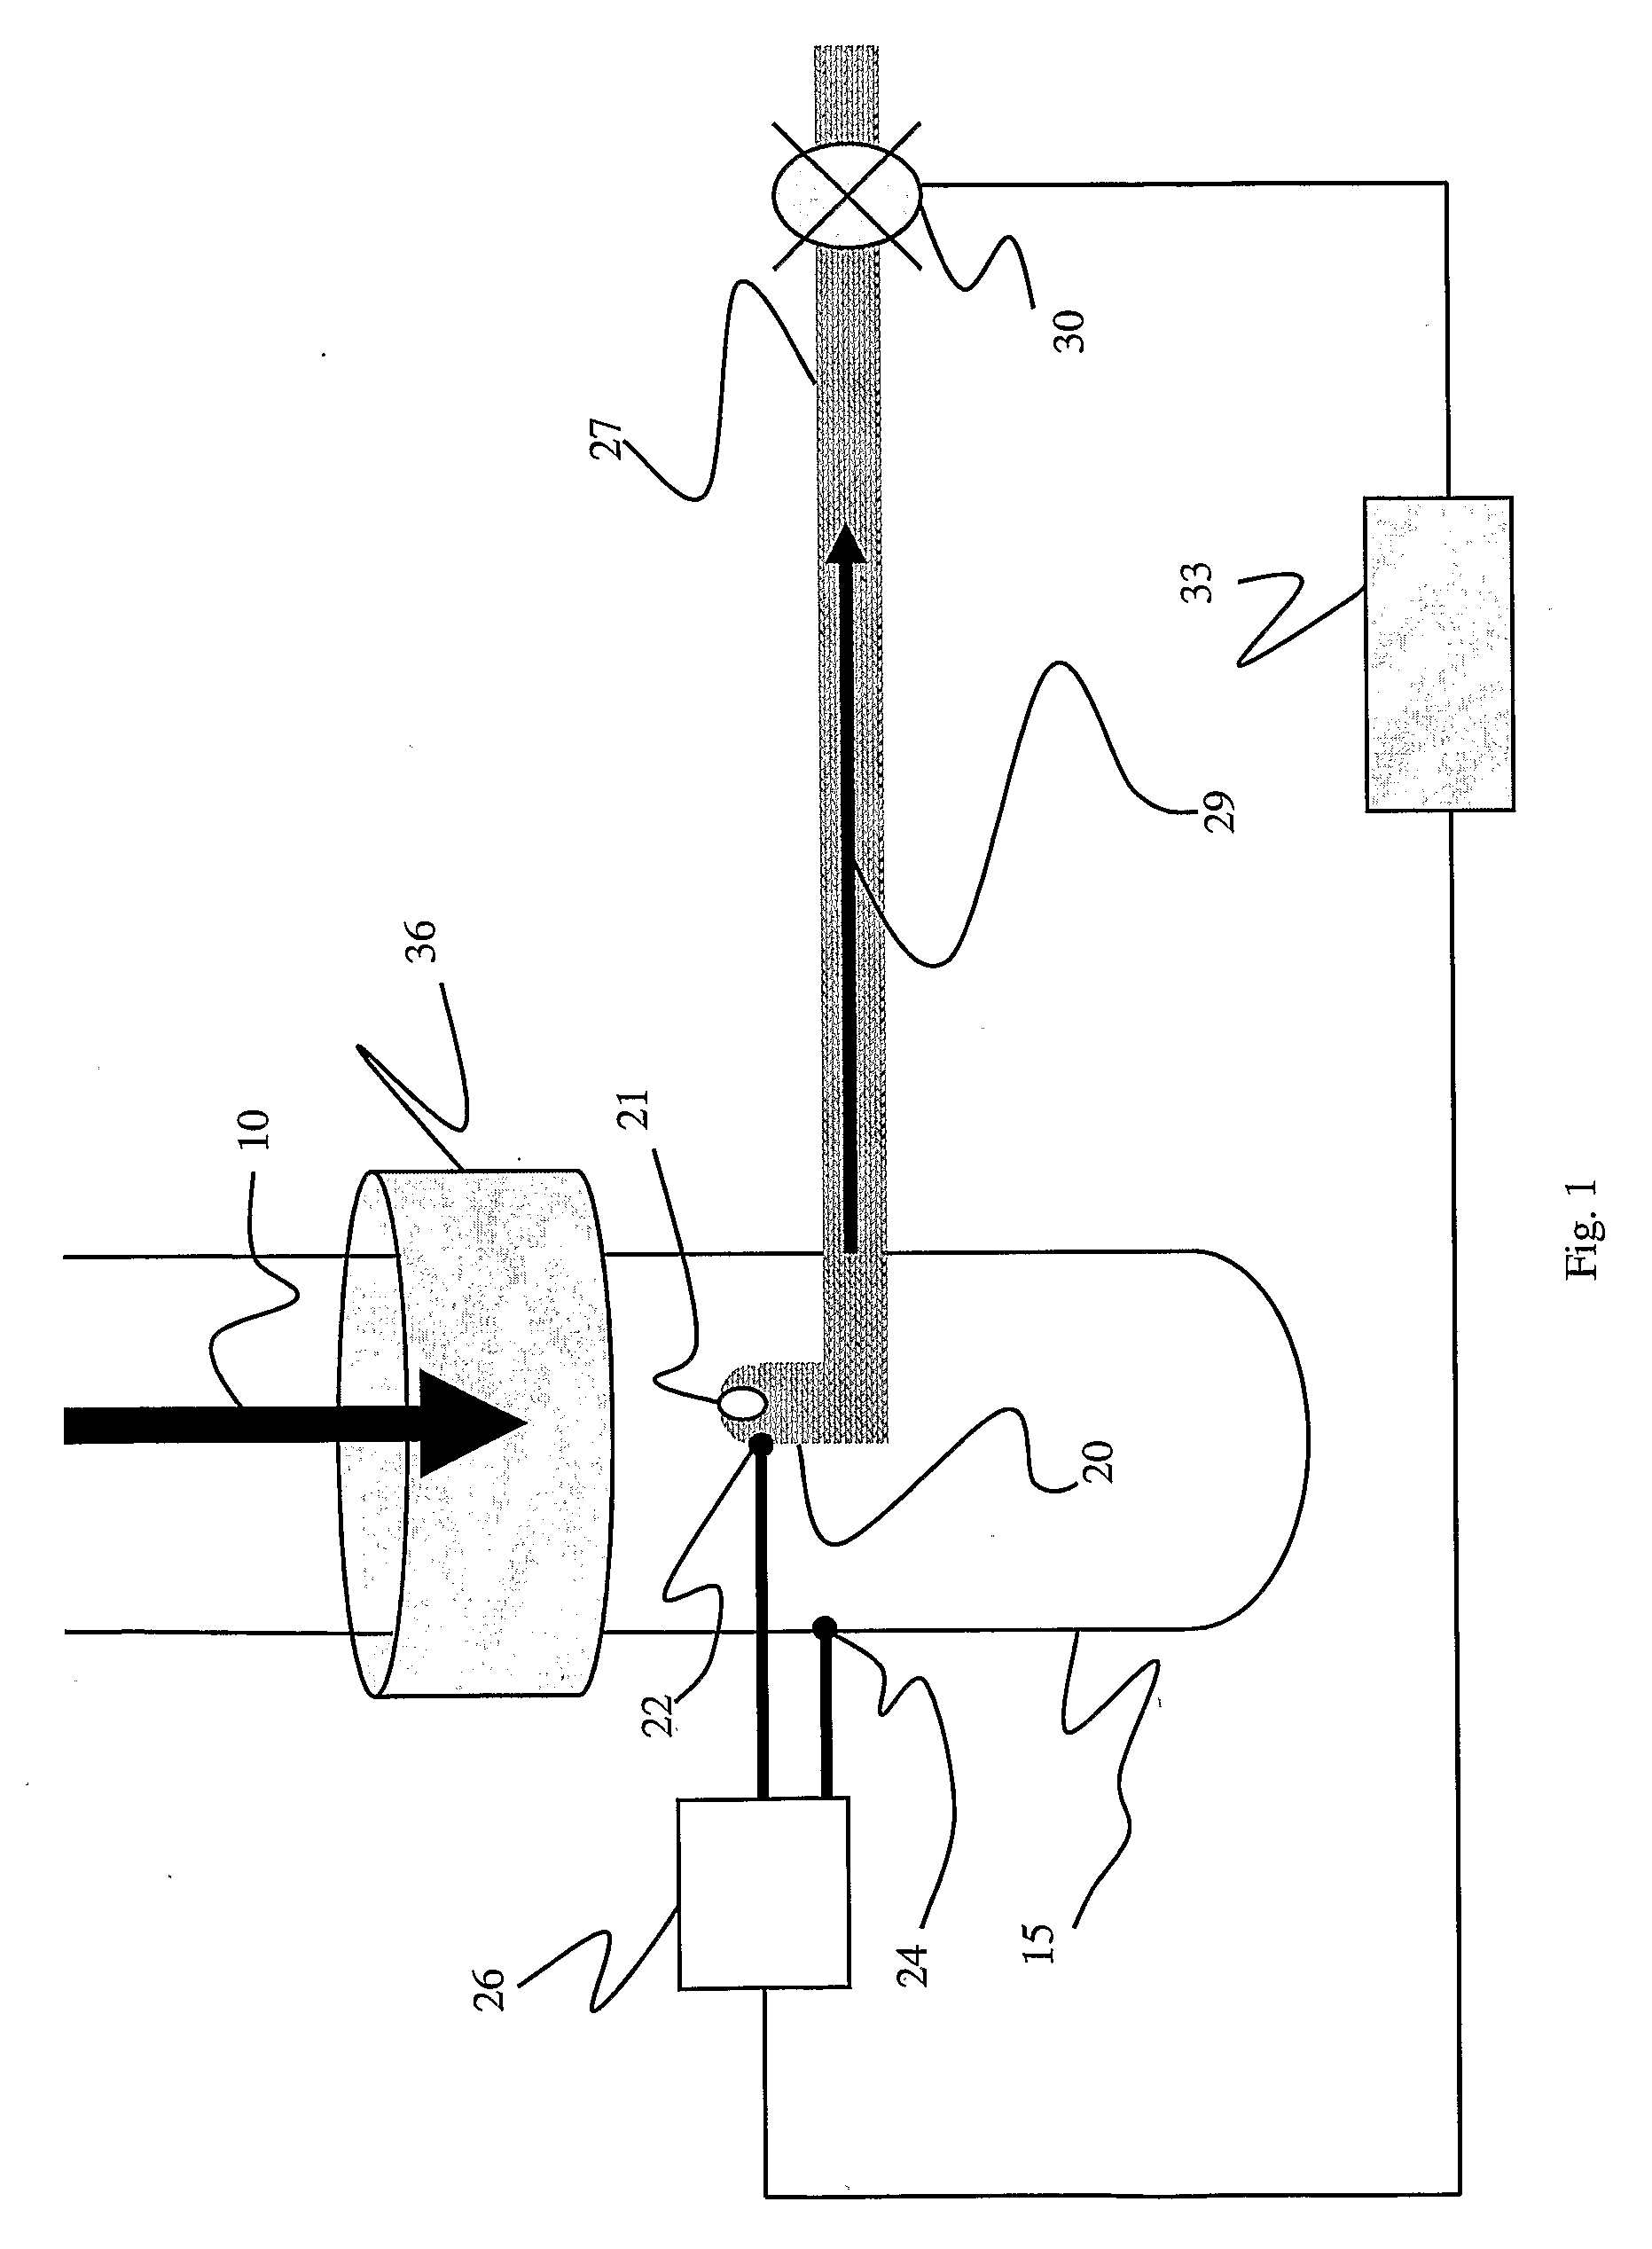 System and method for spot check analysis or spot sampling of a multiphase mixture flowing in a pipeline